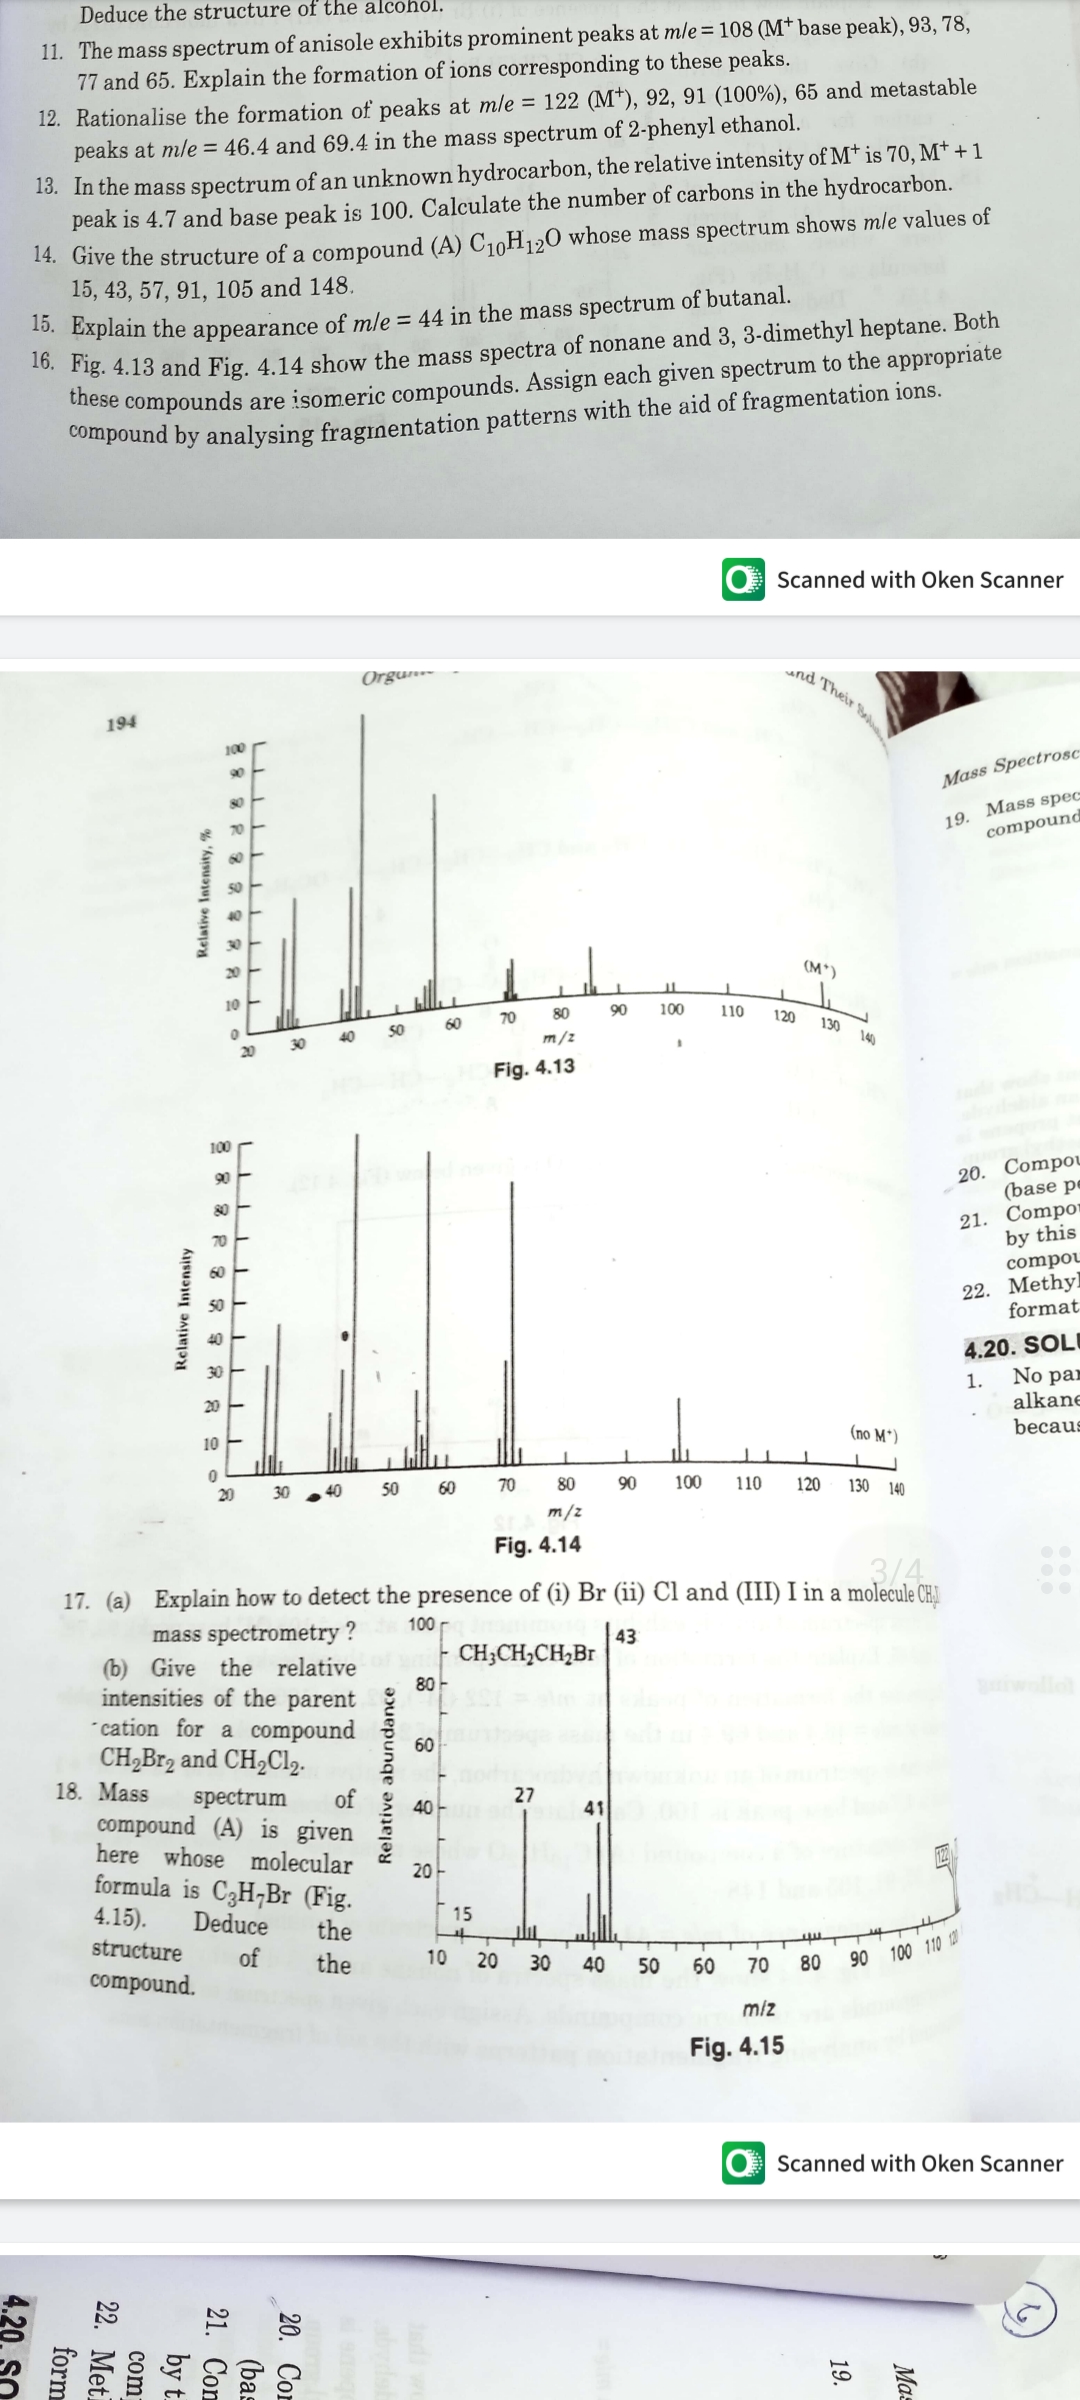 Deduce the structure of the alcohol.
11. The mass spectrum of anisole exhibits prominent peaks at mle= 108 (M† base peak), 93, 78,
77 and 65. Explain the formation of ions corresponding to these peaks.
12. Rationalise the formation of peaks at mle = 122 (M), 92, 91 (100%), 65 and metastable
peaks at mle = 46.4 and 69.4 in the mass spectrum of 2-phenyl ethanol.
13. In the mass spectrum of an unknown hydrocarbon, the relative intensity of M† is 70, M† + 1
peak is 4.7 and base peak is 100. Calculate the number of carbons in the hydrocarbon.
14. Give the structure of a compound (A) C10H120 whose mass spectrum shows mle values of
15, 43, 57, 91, 105 and 148.
*0. Dxplain the appearance of mle = 44 in the mass spectrum of butanal.
*o. Fig. 4.13 and Fig. 4.14 show the mass spectra of nonane and 3, 3-dimethyl heptane. Both
iese compounds are isomeric compounds. Assign each given spectrum to the appropriate
Compound by analysing fraginentation patterns with the aid of fragmentation ions.
Scanned with Oken Scanner
Orgun-
nd Their Bol
194
100
90
Mass Spectrosc:
80
19. Mass spec
compound
70
20
(M*)
10
60
70
80
90
100
110
120
40
50
130
20
30
m/z
140
Fig. 4.13
100
20. Compou
(base pe
90
80
21. Compor
by this
70
60
compou
Methyl
22.
format
50
40
4.20. SOLI
No par
30
1.
alkane
becaus
20
10
(no M*)
20
50
60
70
80
90
100
110
120
130 140
m/z
Fig. 4.14
3/4
17. (a) Explain how to detect the presence of (i) Br (ii) Cl and (III) I in a molecule CH.
100
mass spectrometry ?
(b) Give the relative
intensities of the parent
cation for a compound
CH2B12 and CH2CI2.
18. Mass
43
| CH;CH,CH,Br
80 -
wollo
60
spectrum
of
compound (A) is given
here whose molecular
formula is C3H¬Br (Fig.
27
40
41
20
4.15).
Deduce
15
the
structure
of
compound.
the
10
20
30
40
90 100 110 1
50
60
70
80
miz
Fig. 4.15
O Scanned with Oken Scanner
Ma=
19.
Relative abundance
21. Con
by t.
com
22. Meti
form
Relative Intensity, %
Relative Intensity
4.20. SO
